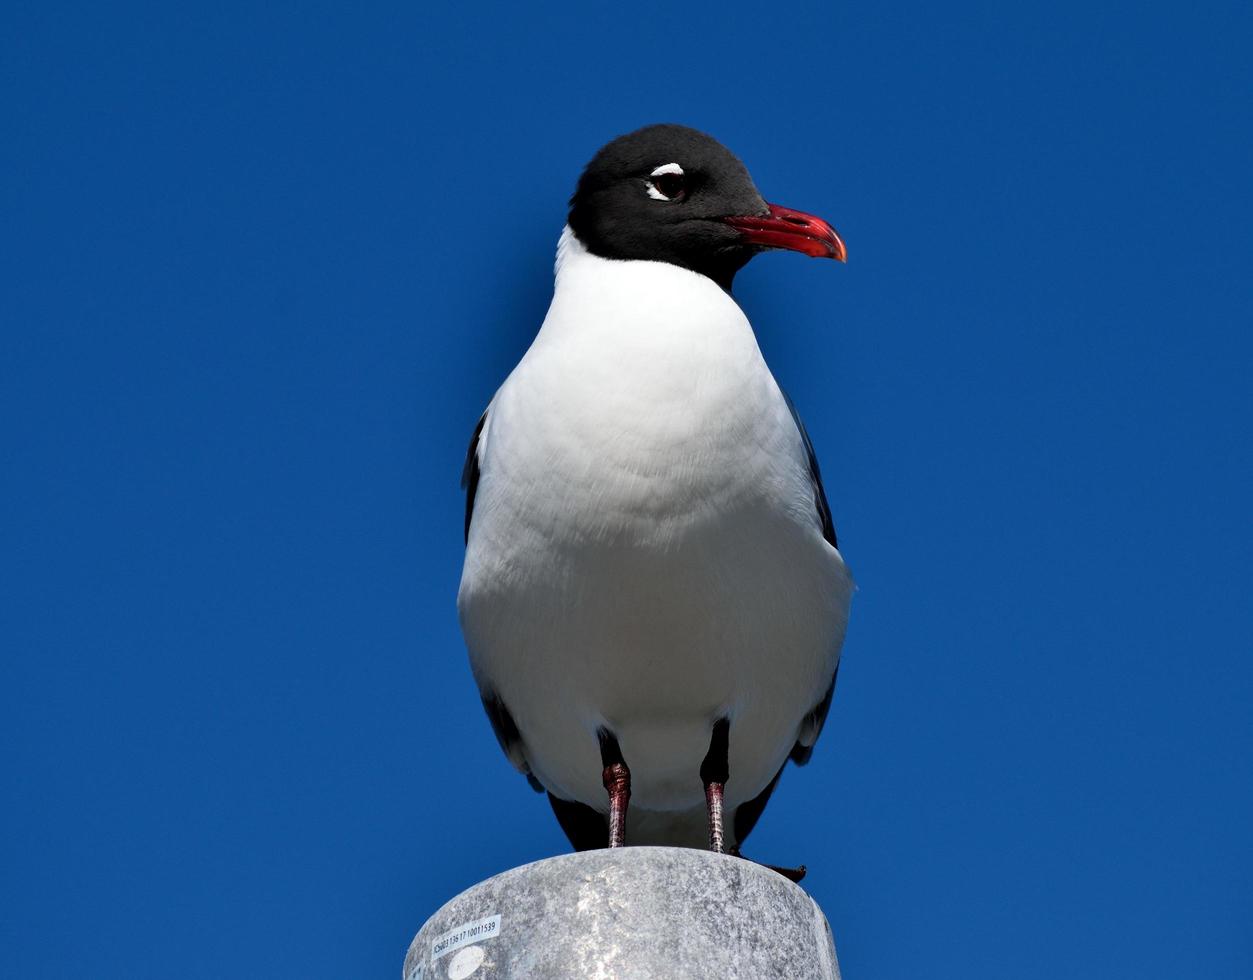 Laughing gull close-up photo